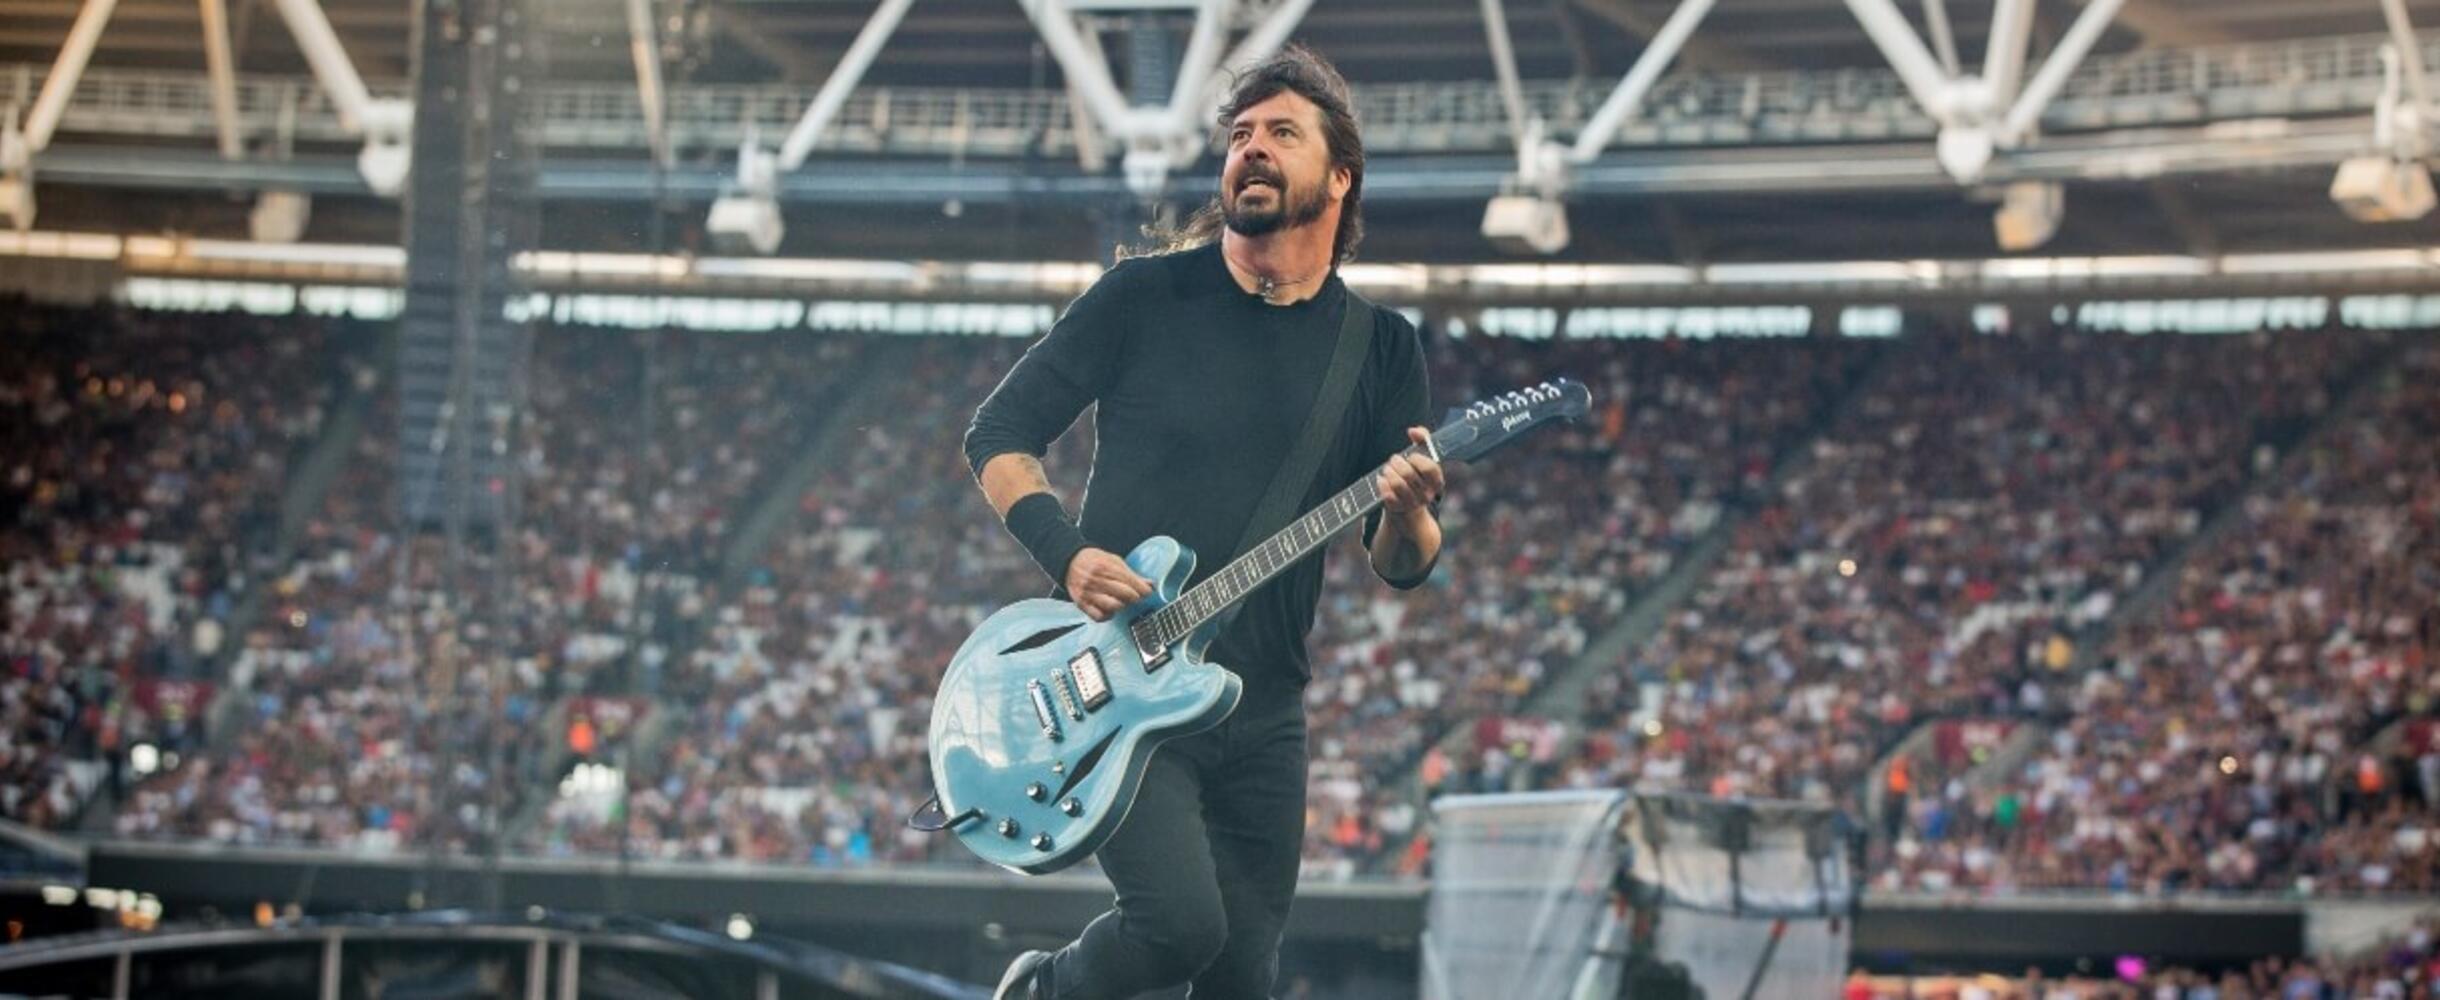 Dave Grohl performing at London Stadium